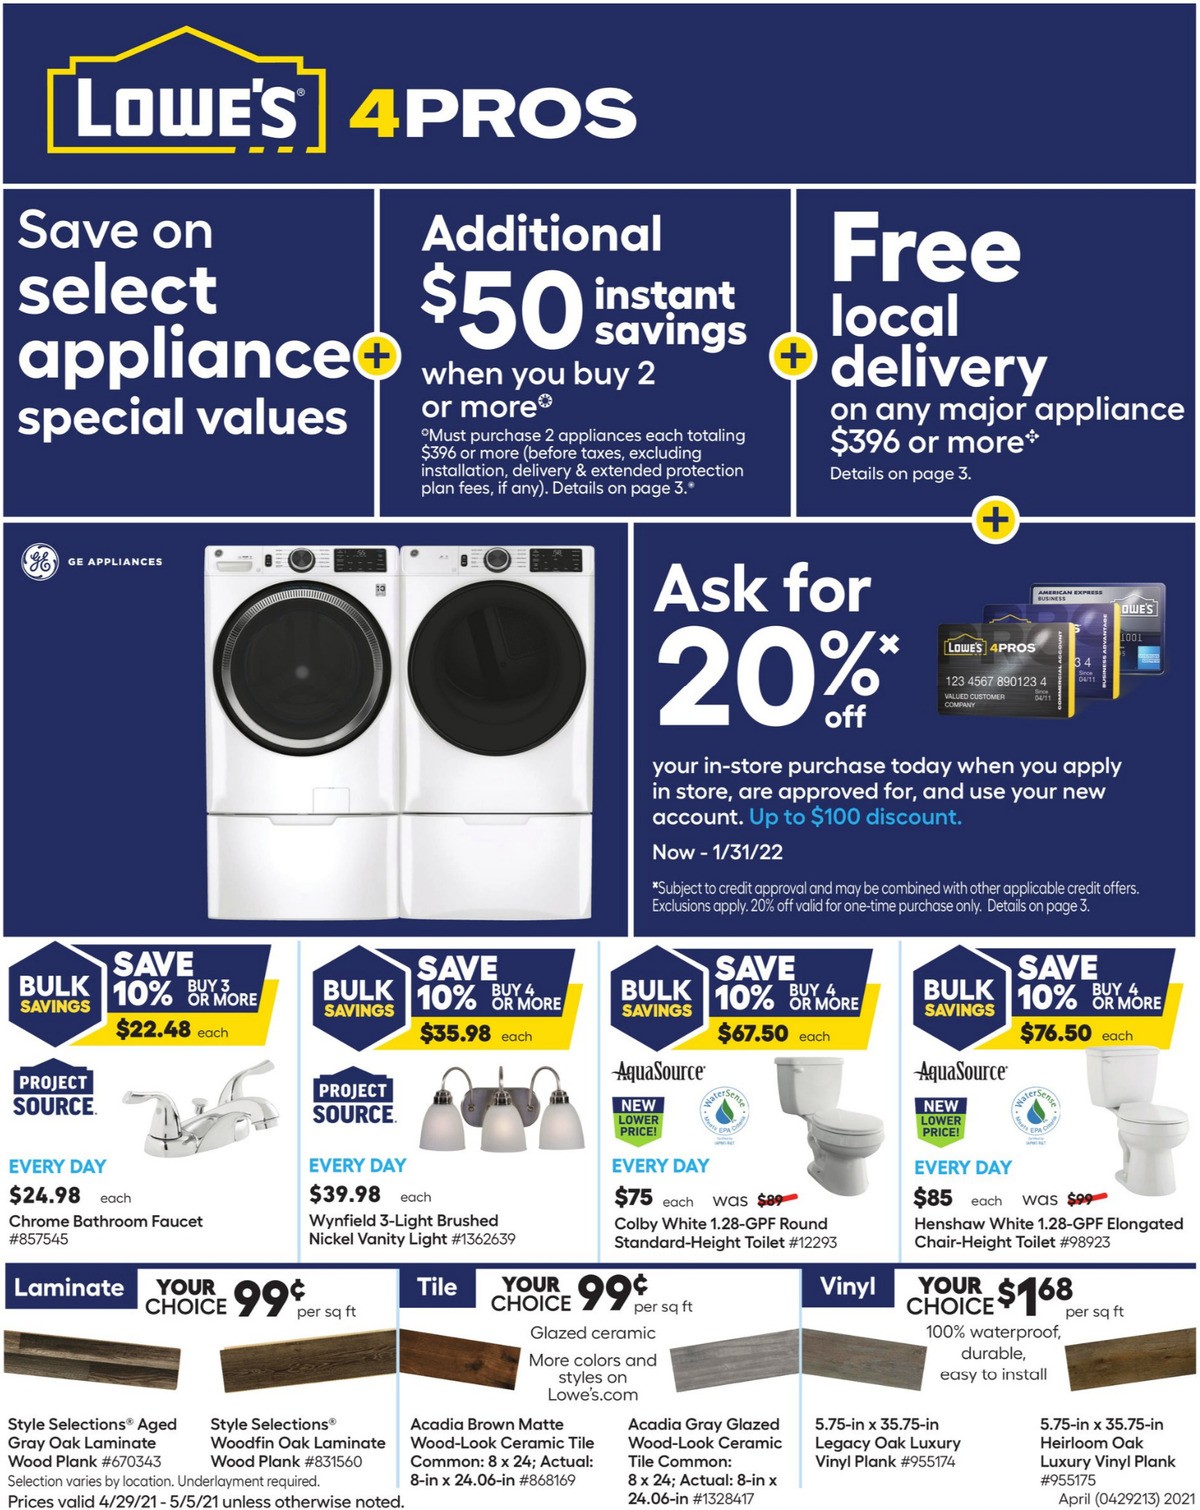 Lowe's Pro Ad for April 29 Page 2